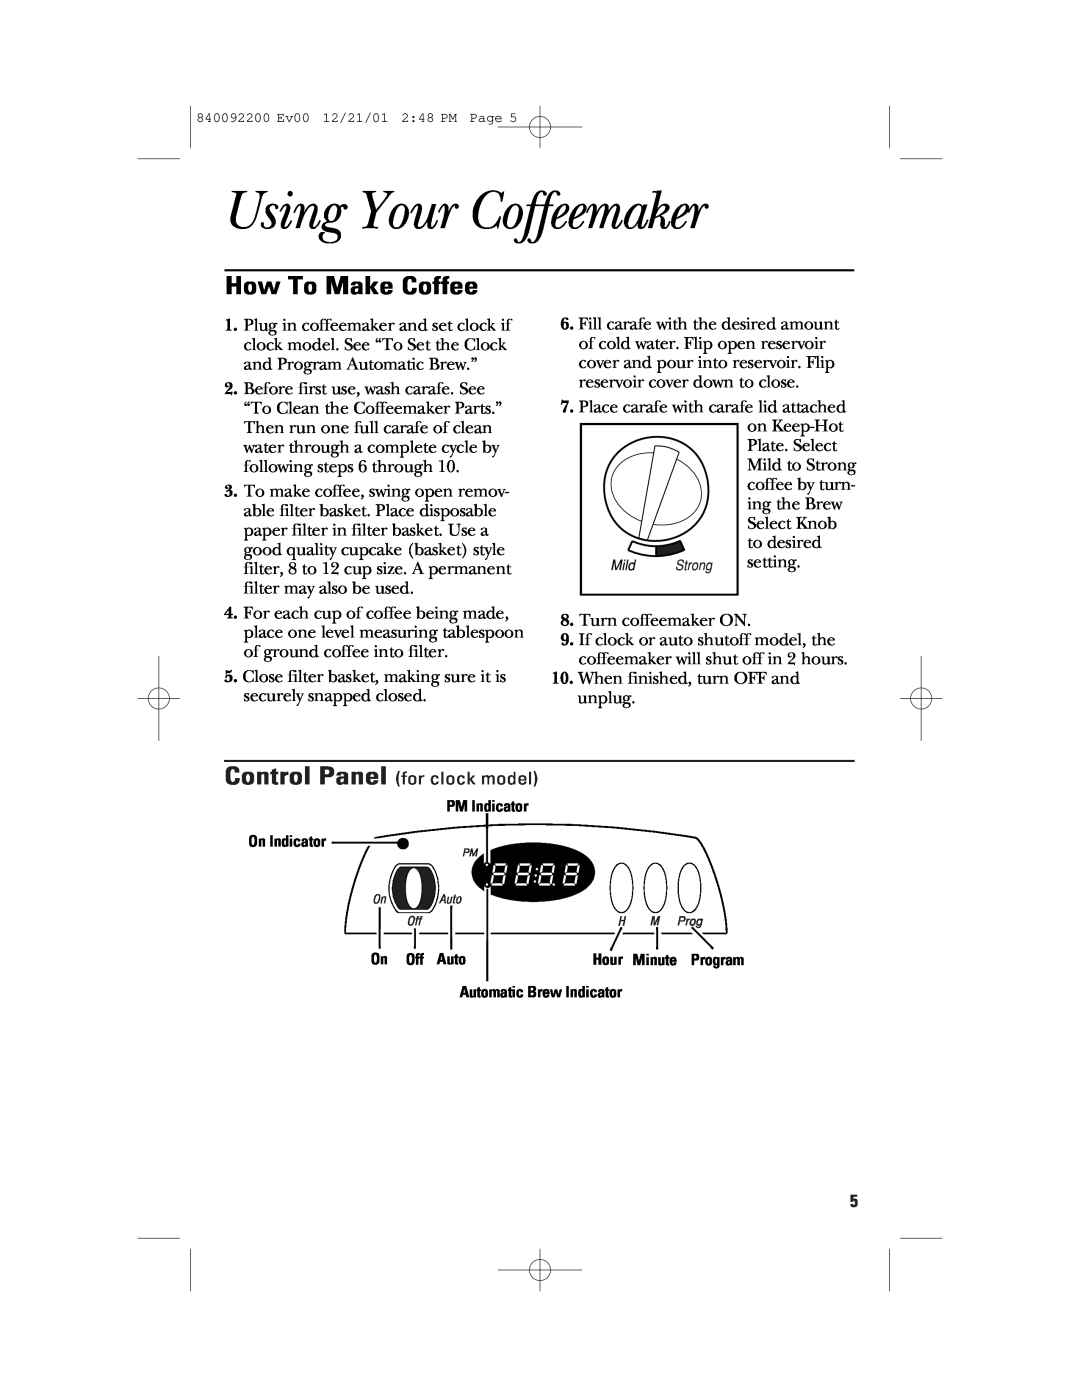 GE 106721, 840092200 manual Using Your Coffeemaker, How To Make Coffee 